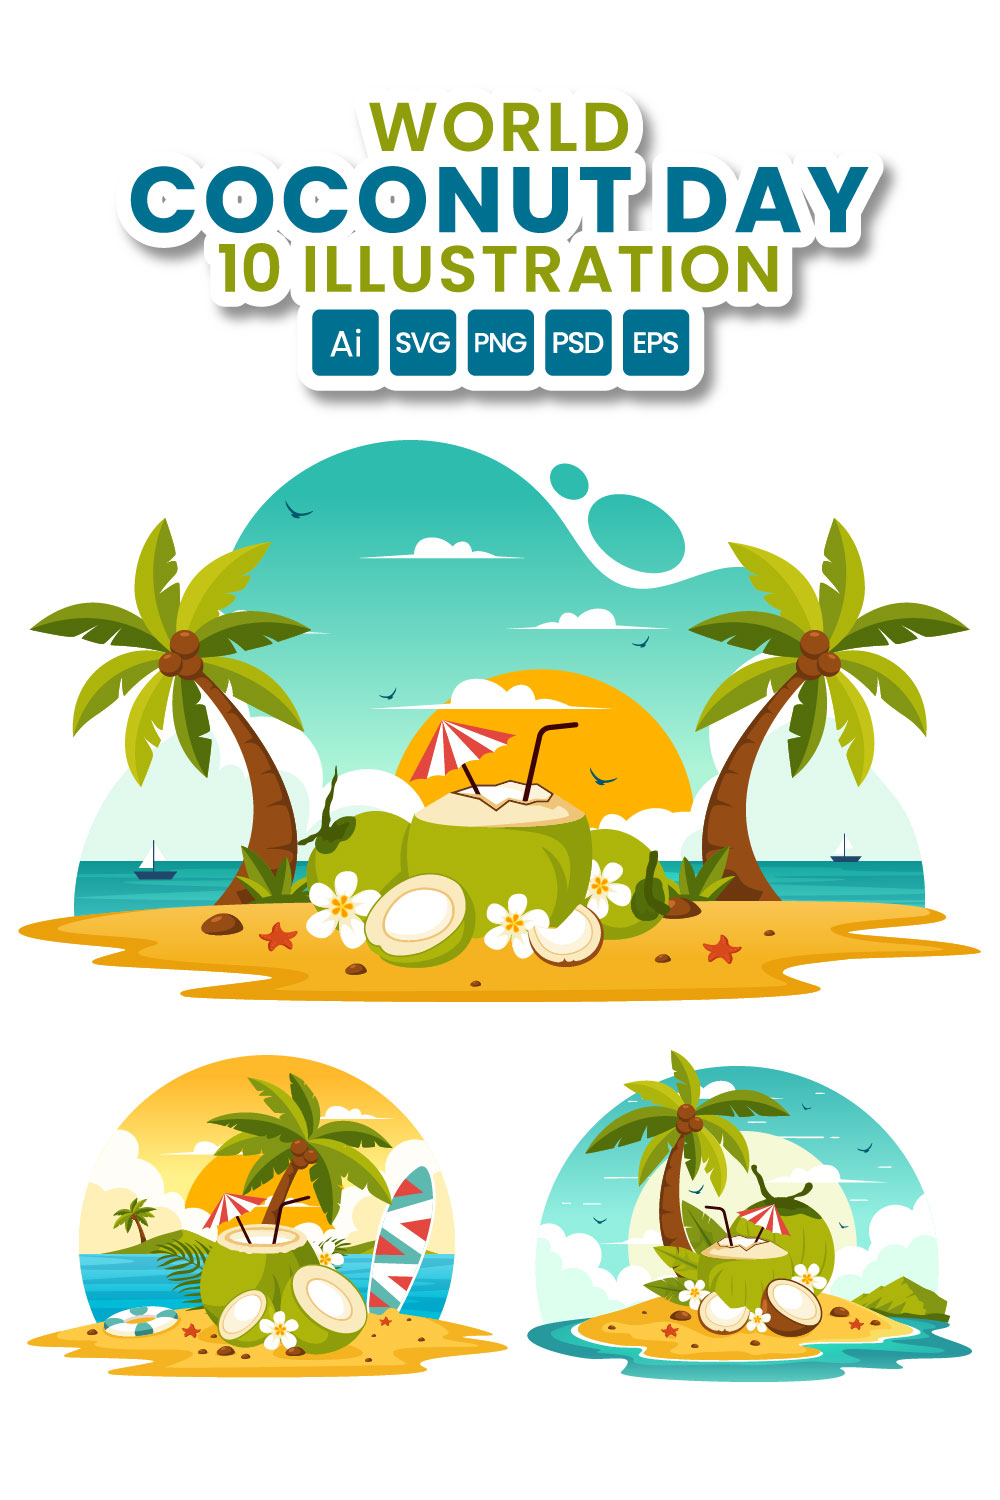 10 World Coconut Day Illustration pinterest preview image.